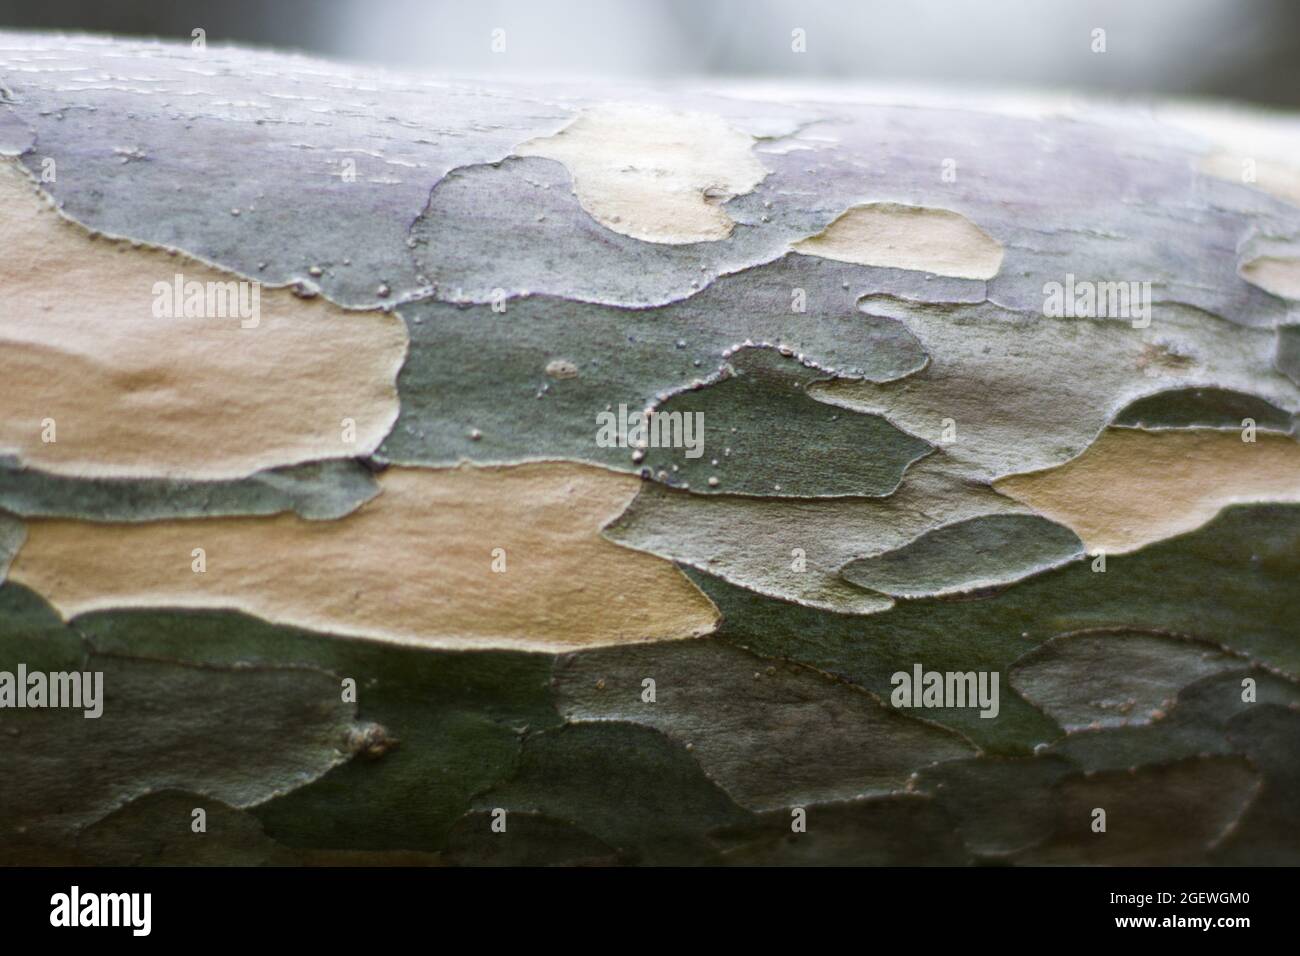 Closeup of a wooden stump texture in army color Stock Photo